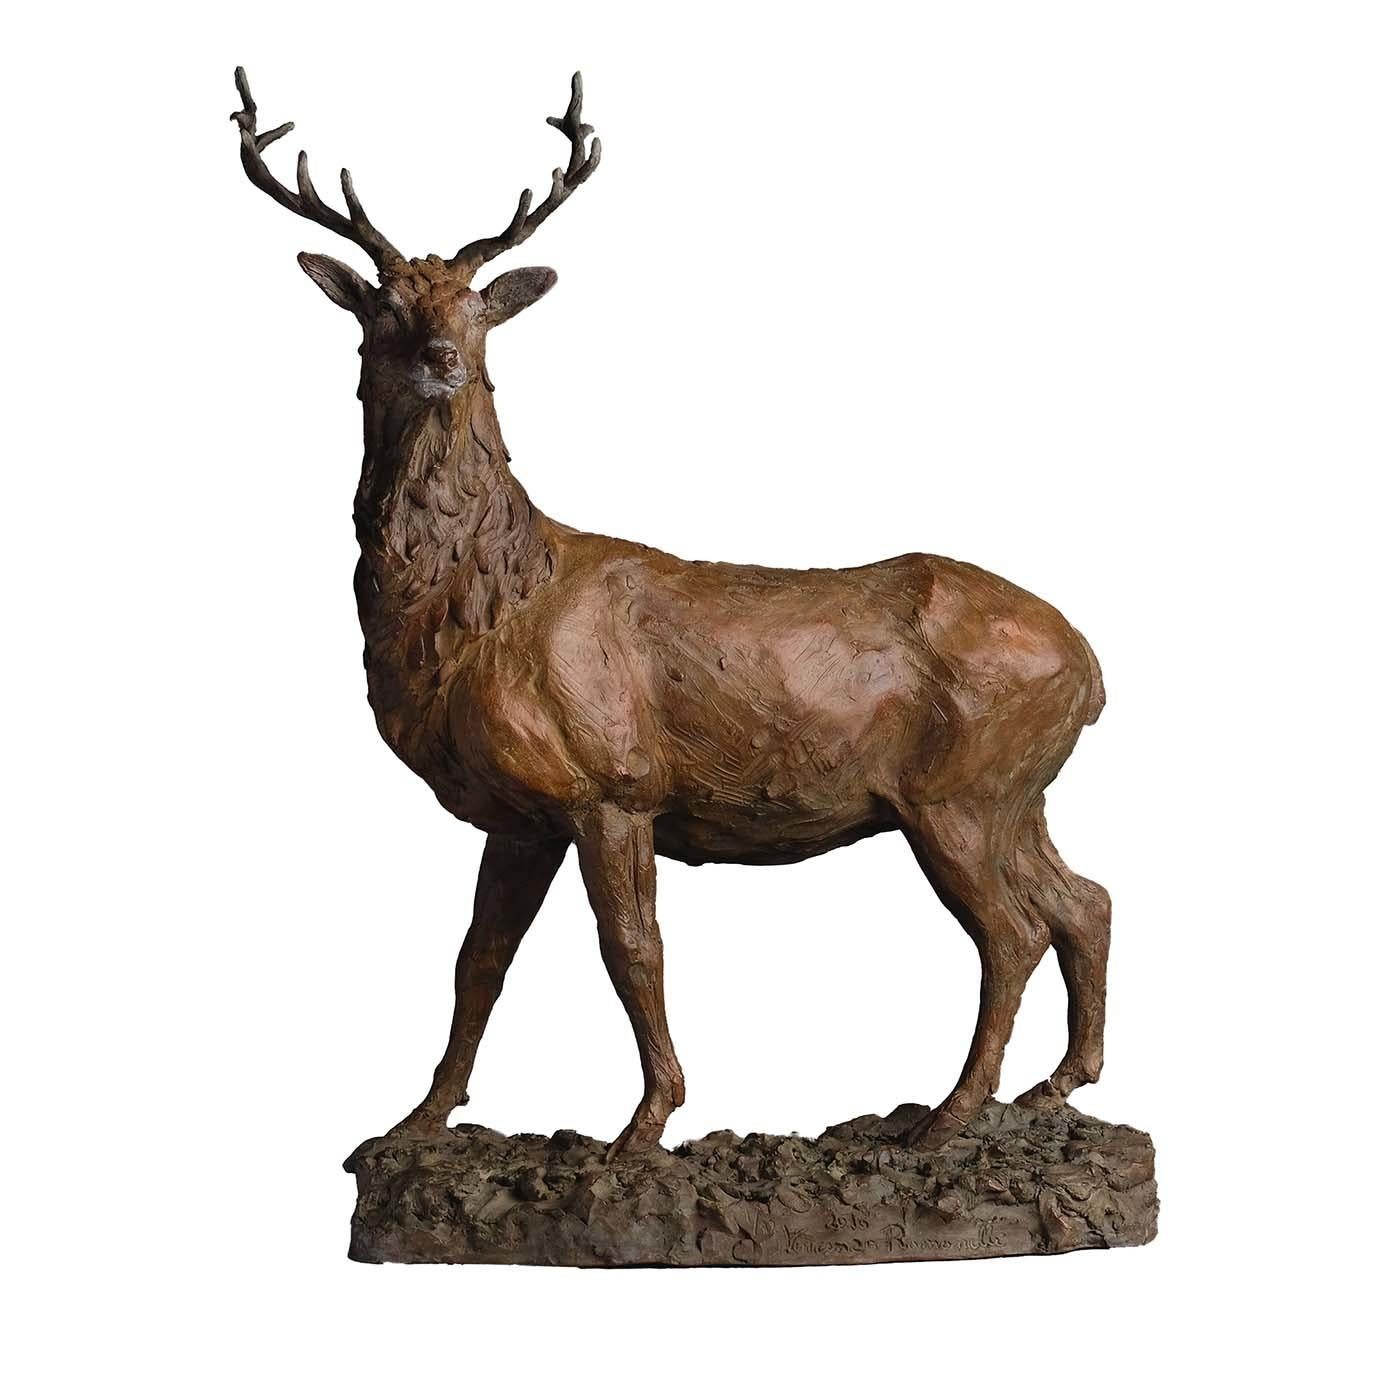 Symbol of spiritual authority, a red deer stag is here depicted in all its magnificent elegance. Vincenzo Romanelli studied this animal up close in the wilderness of the Scottish highlands and created a clay model. When he returned to his Florentine